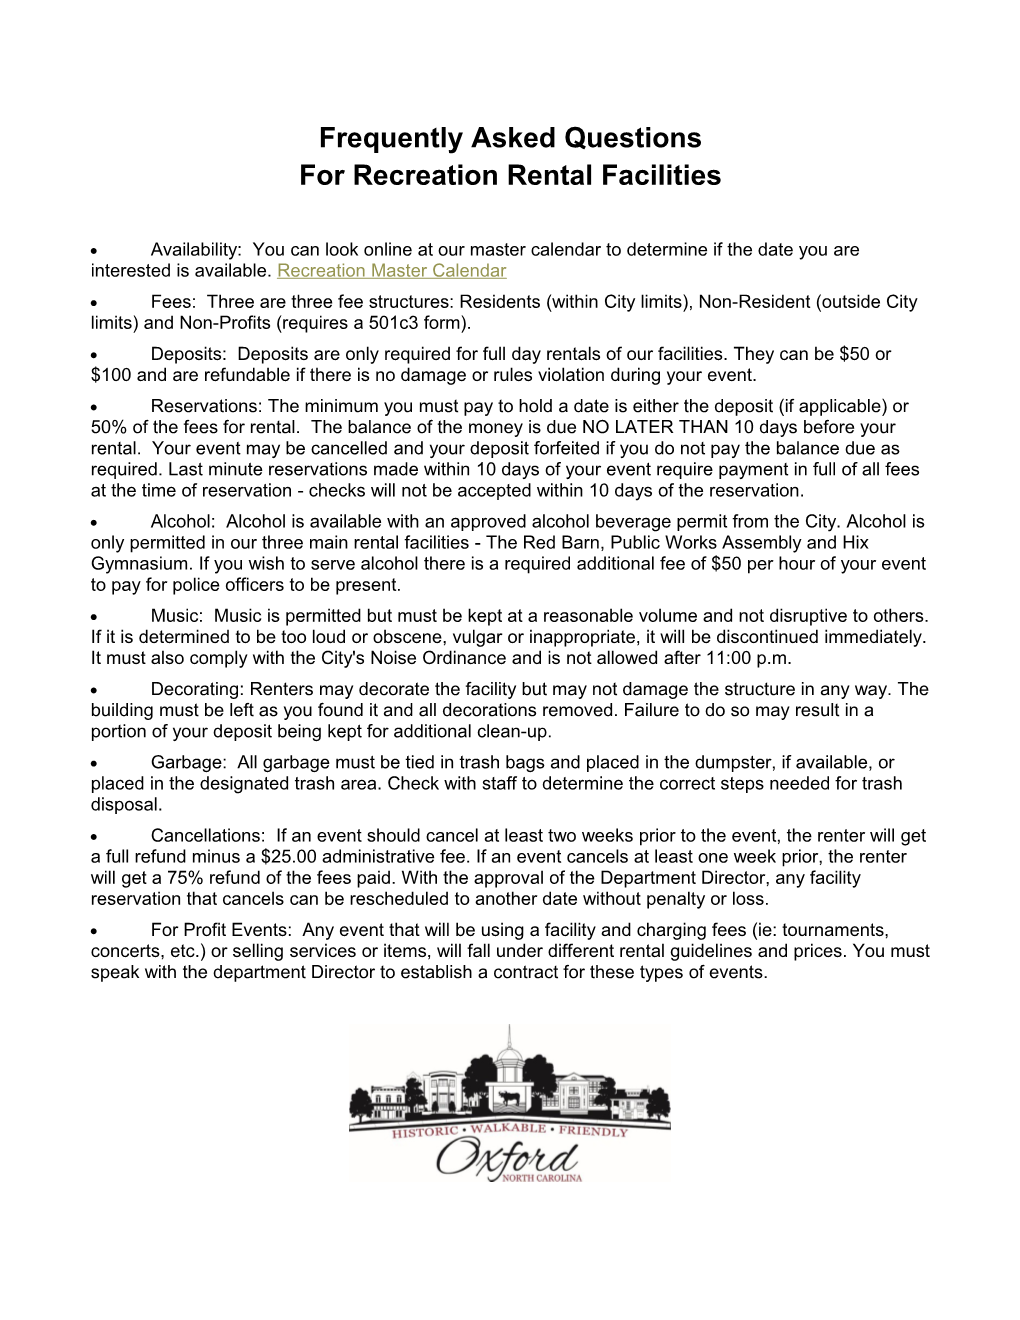 For Recreation Rental Facilities